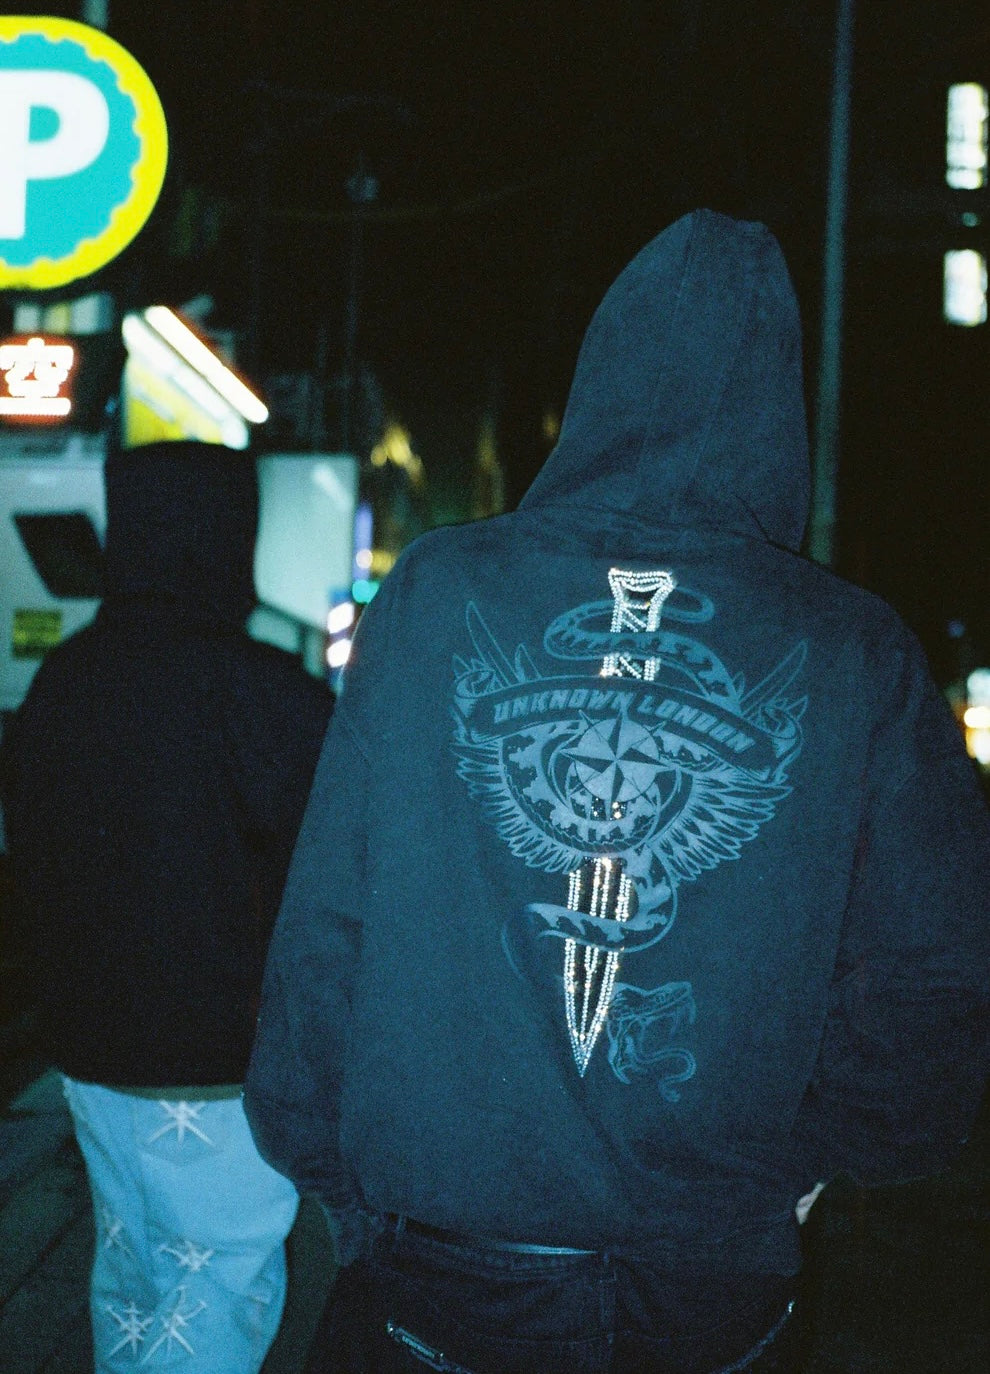 Dagger Graphic Washed Hoodie - Unknown London